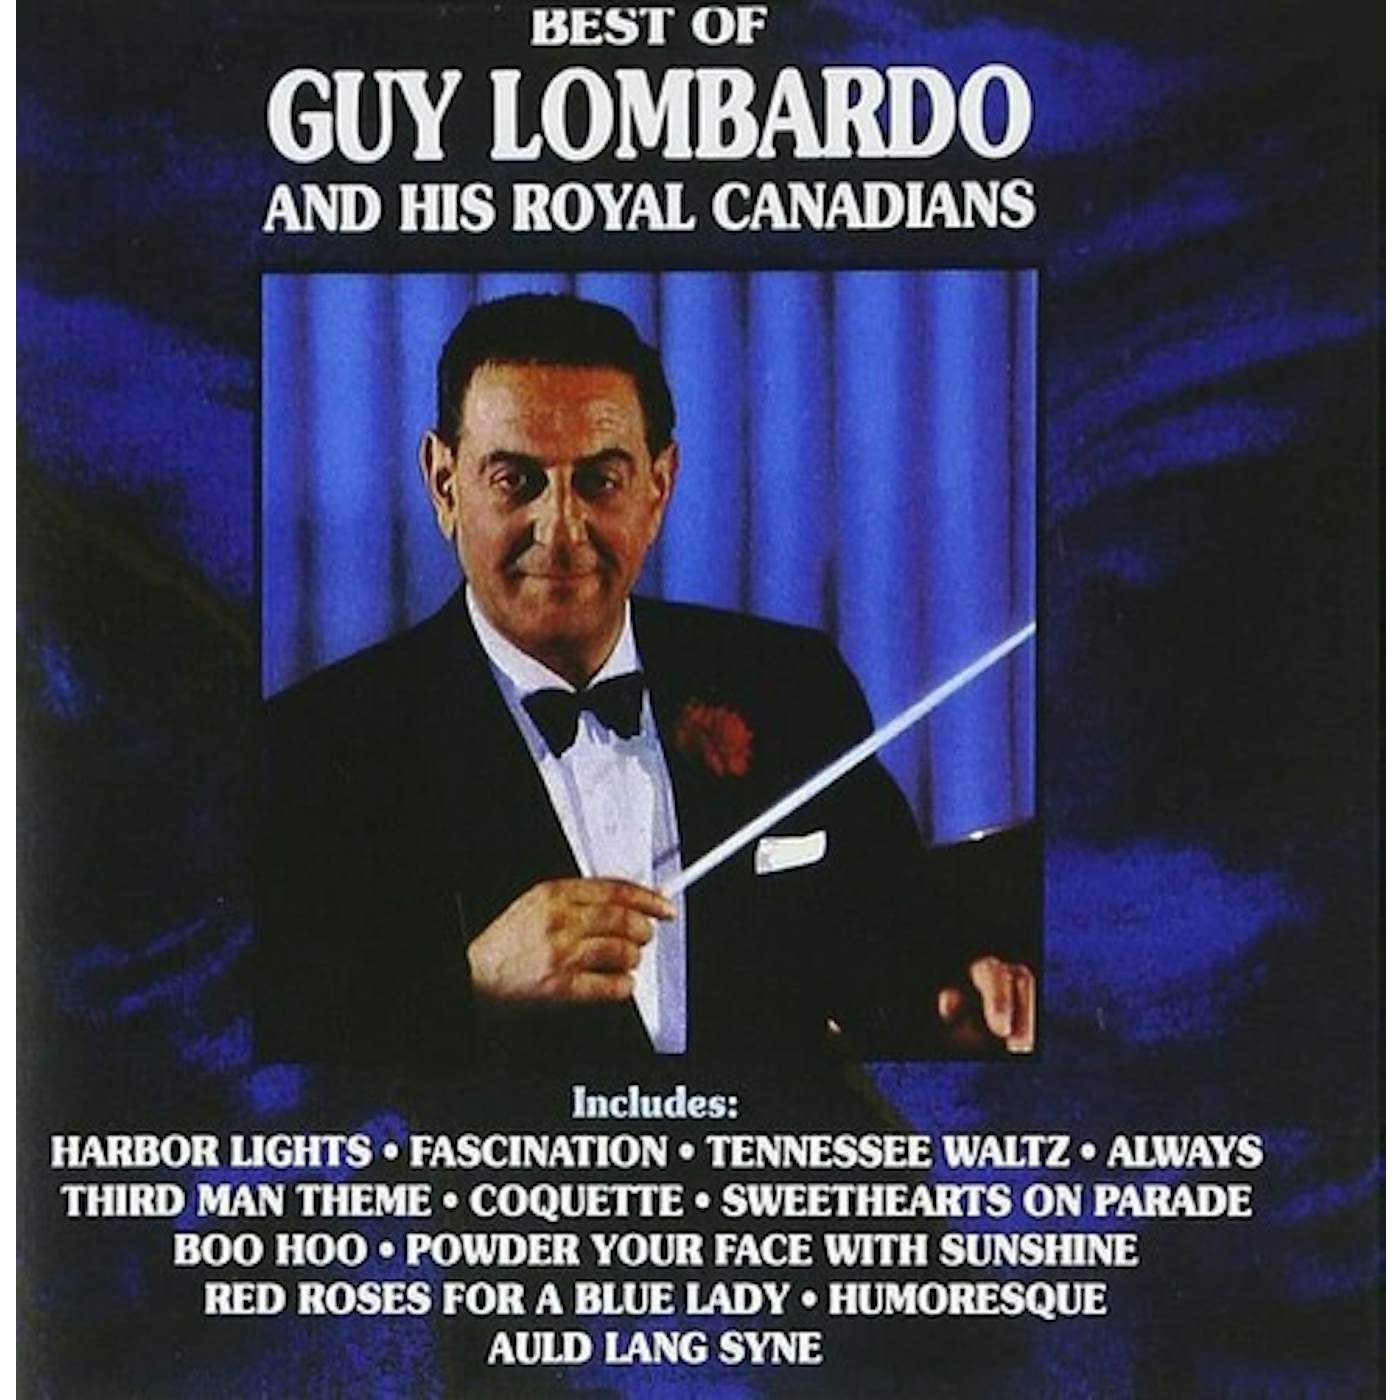 Best Of Guy Lombardo And His Royal Canadians Vinyl Record